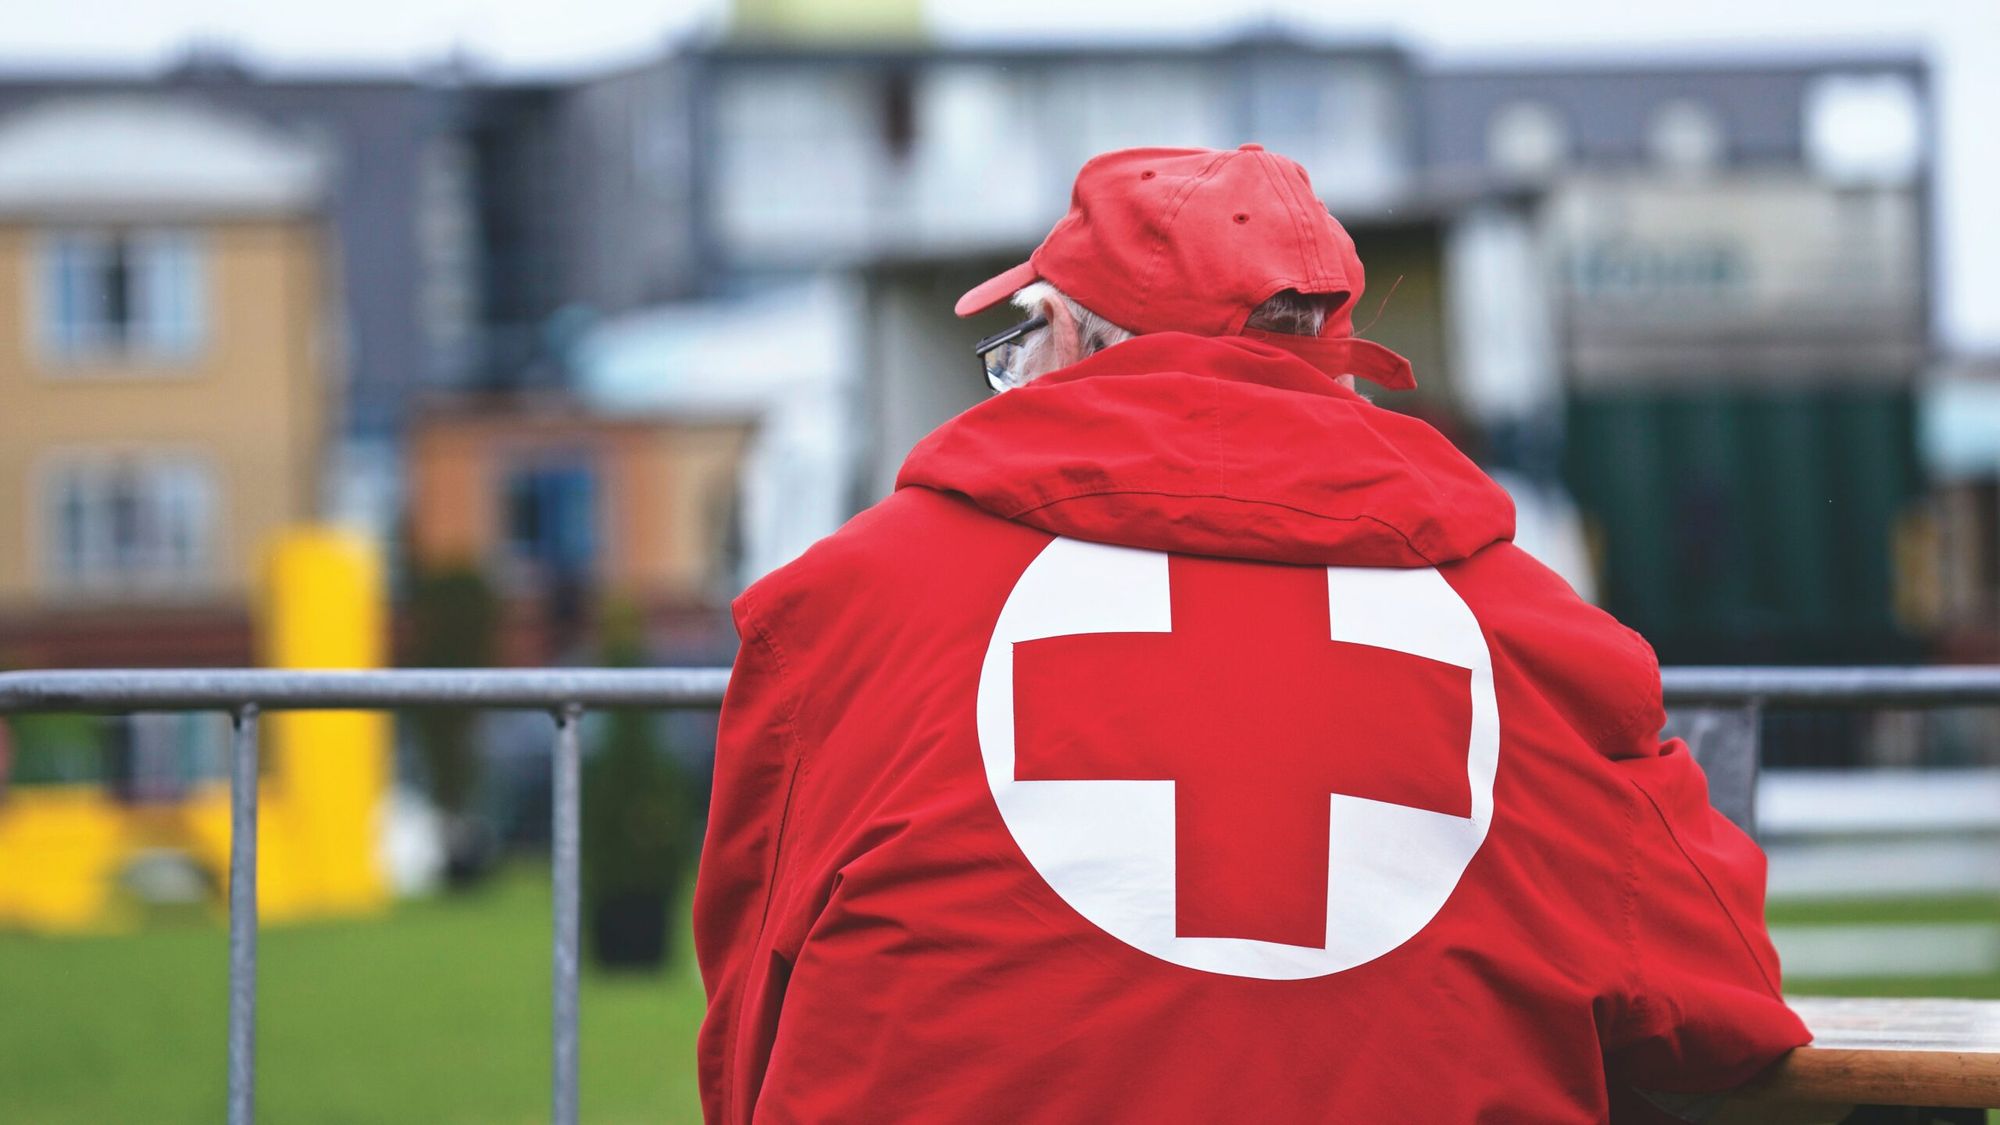 red cross member looking over buildings and a field during the day